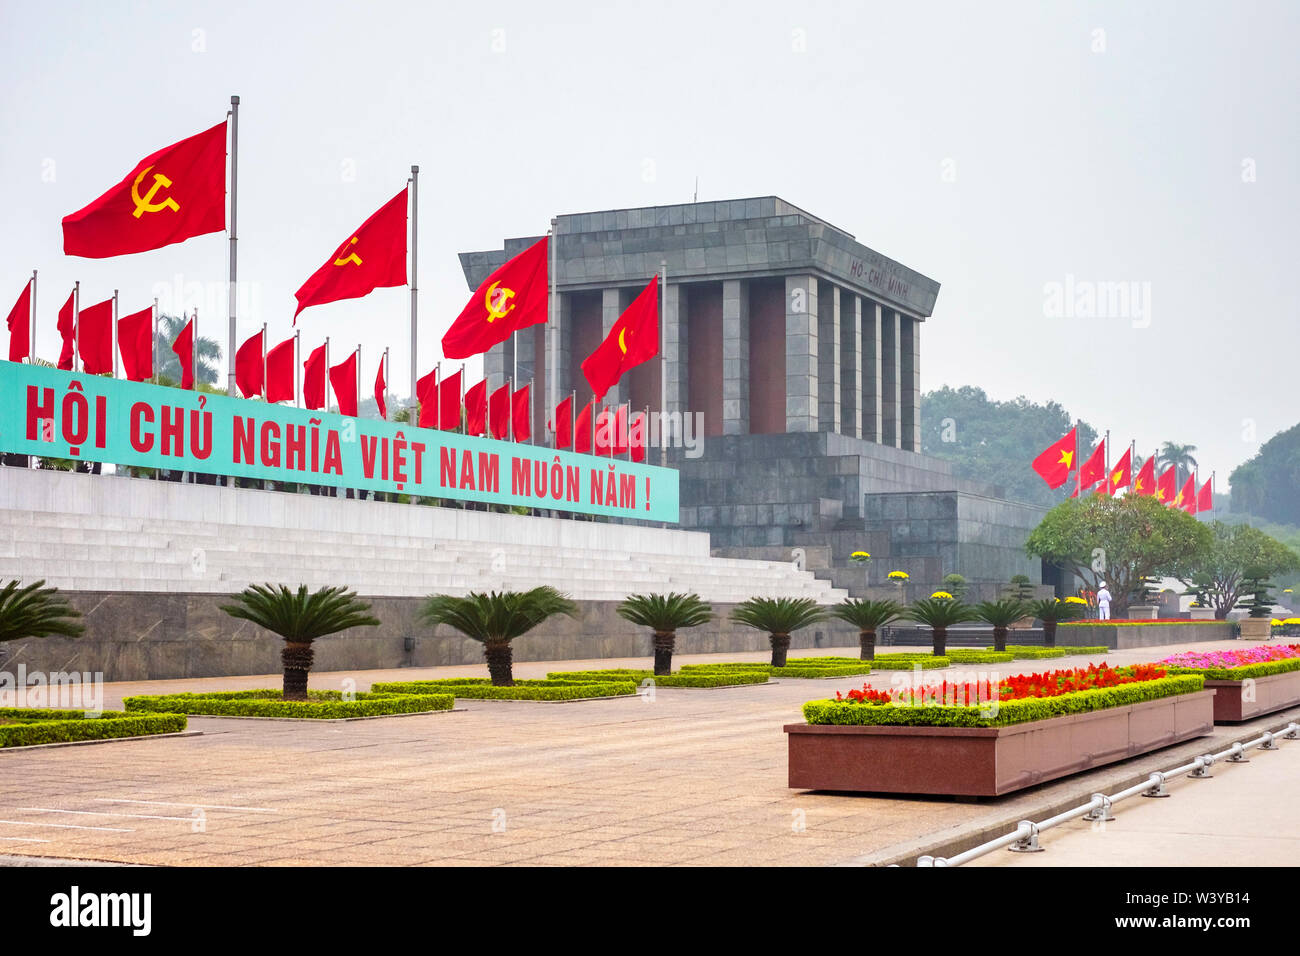 Communist flags fly outside of Ho Chi Minh Mausoleum on Ba Dinh Square, Hanoi, Vietnam Stock Photo